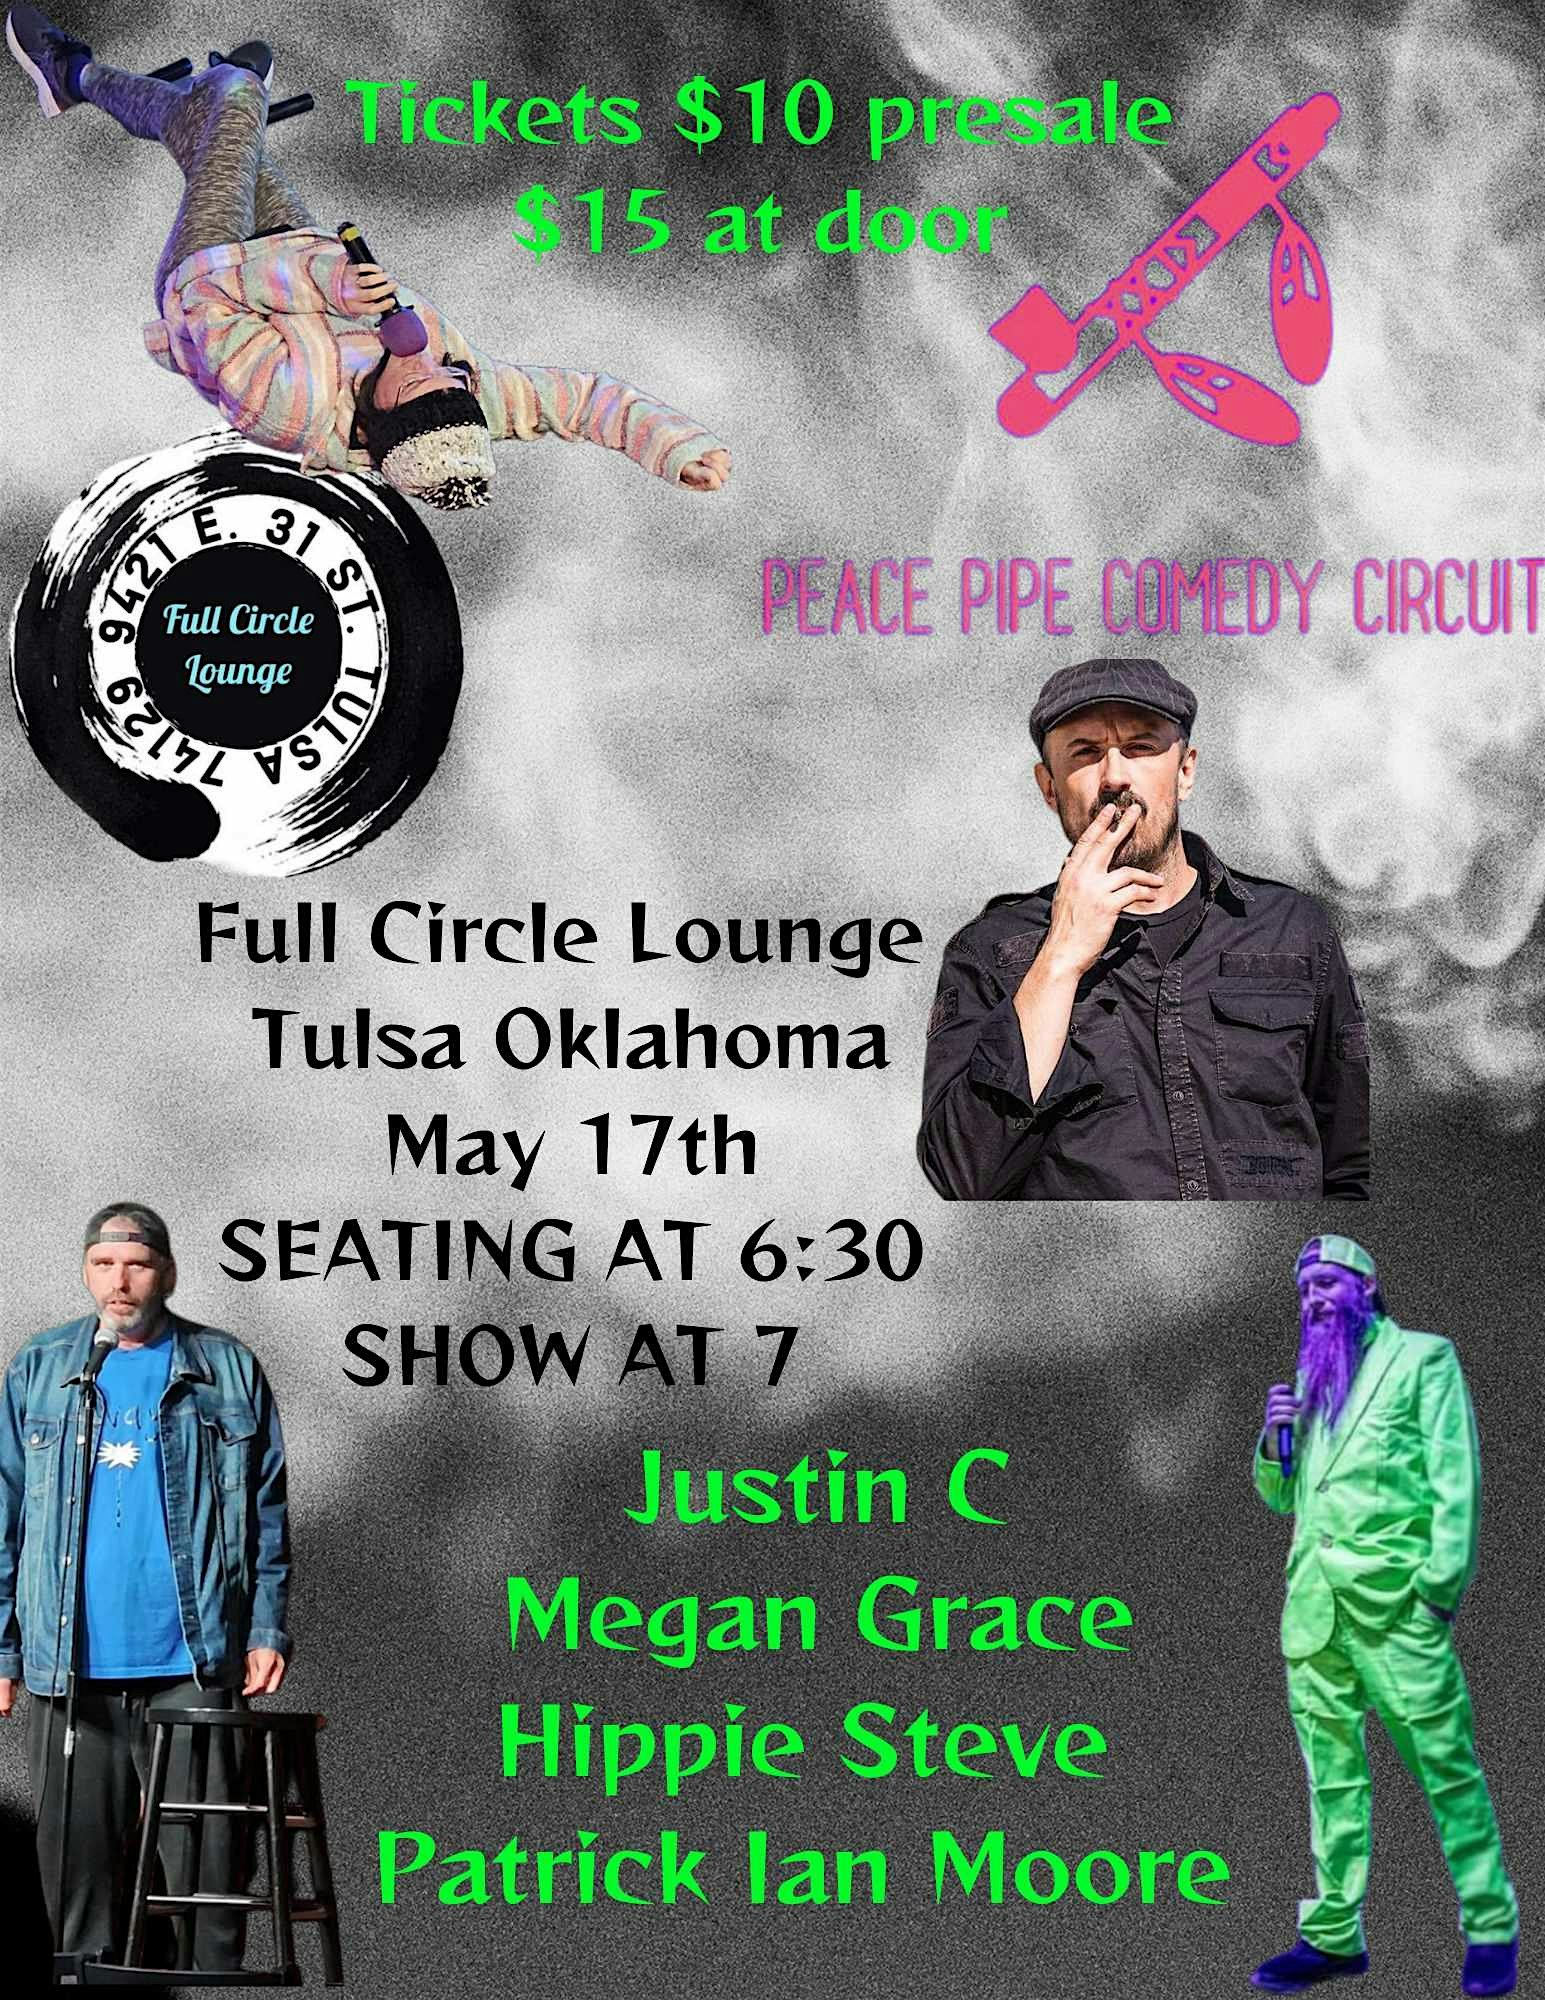 Peace Pipe Comedy Circuit